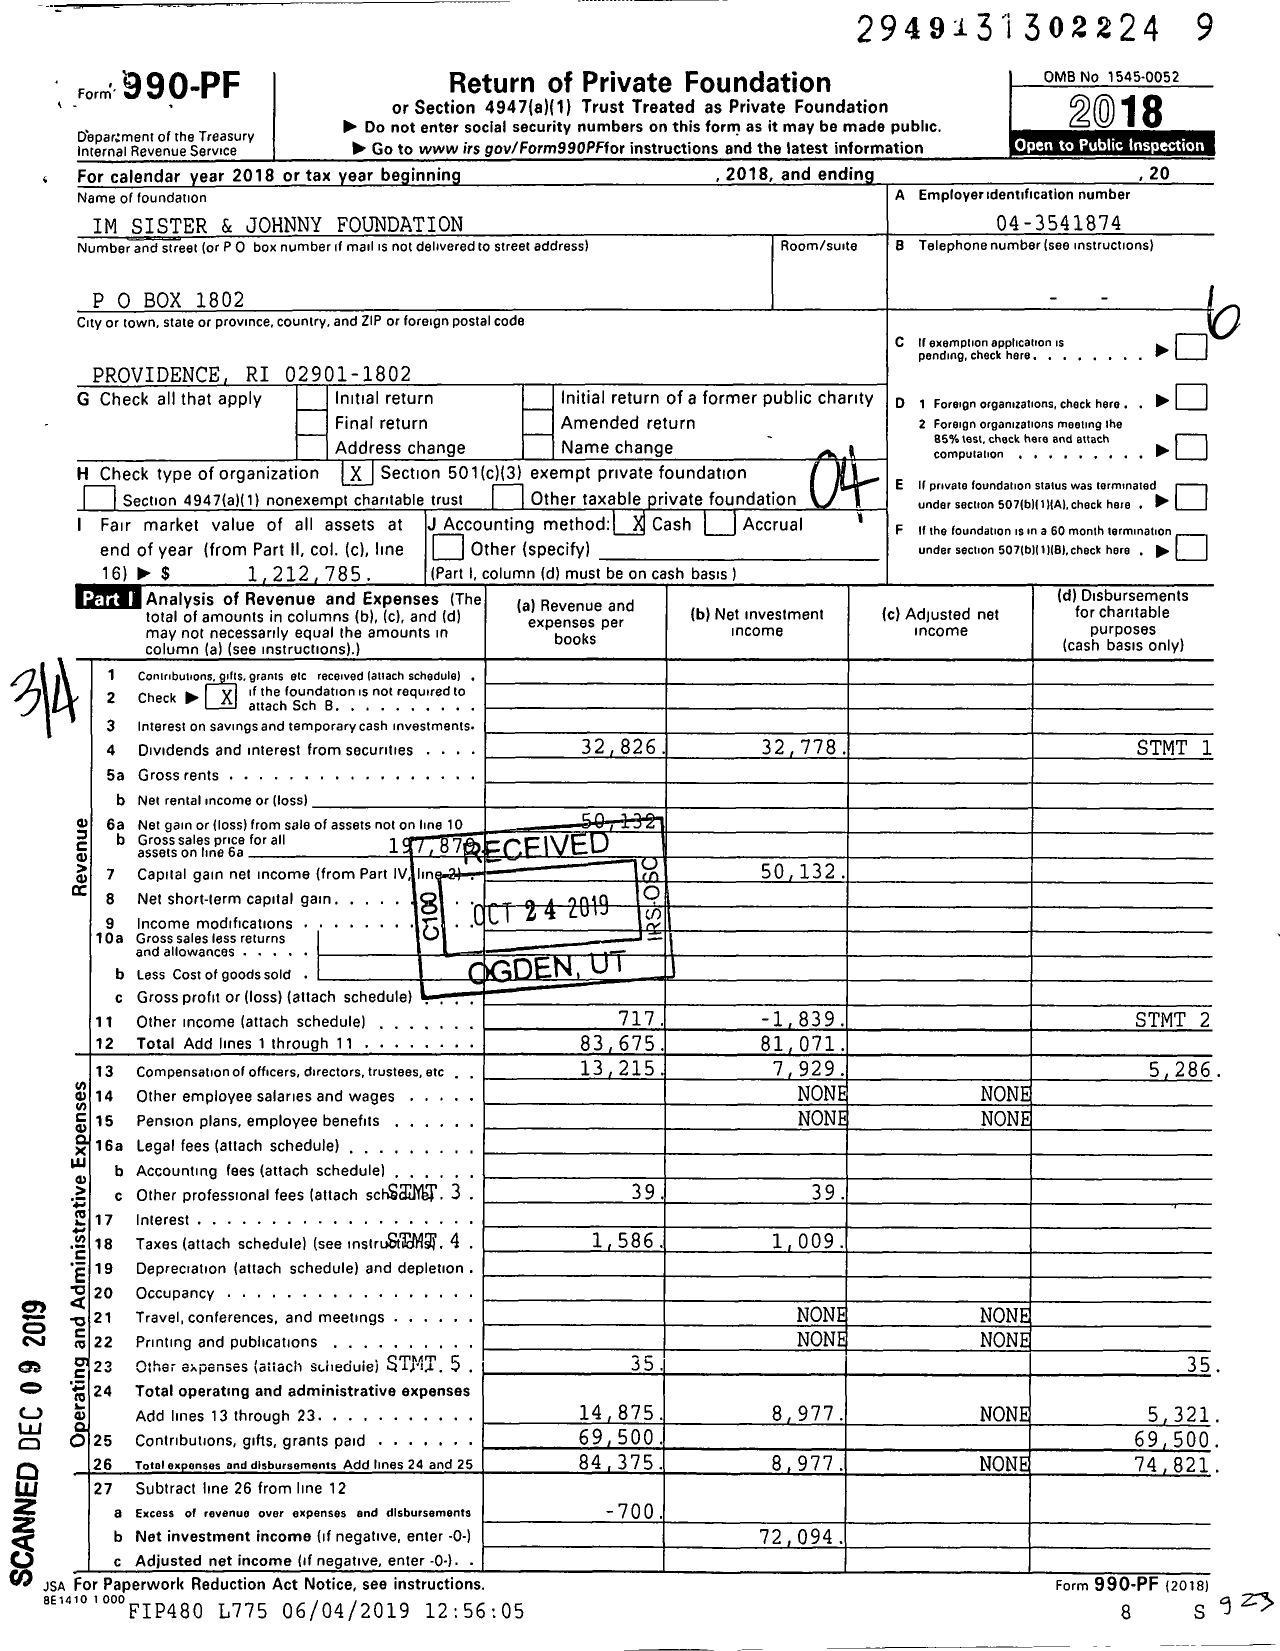 Image of first page of 2018 Form 990PF for Im Sister and Johnny Foundation